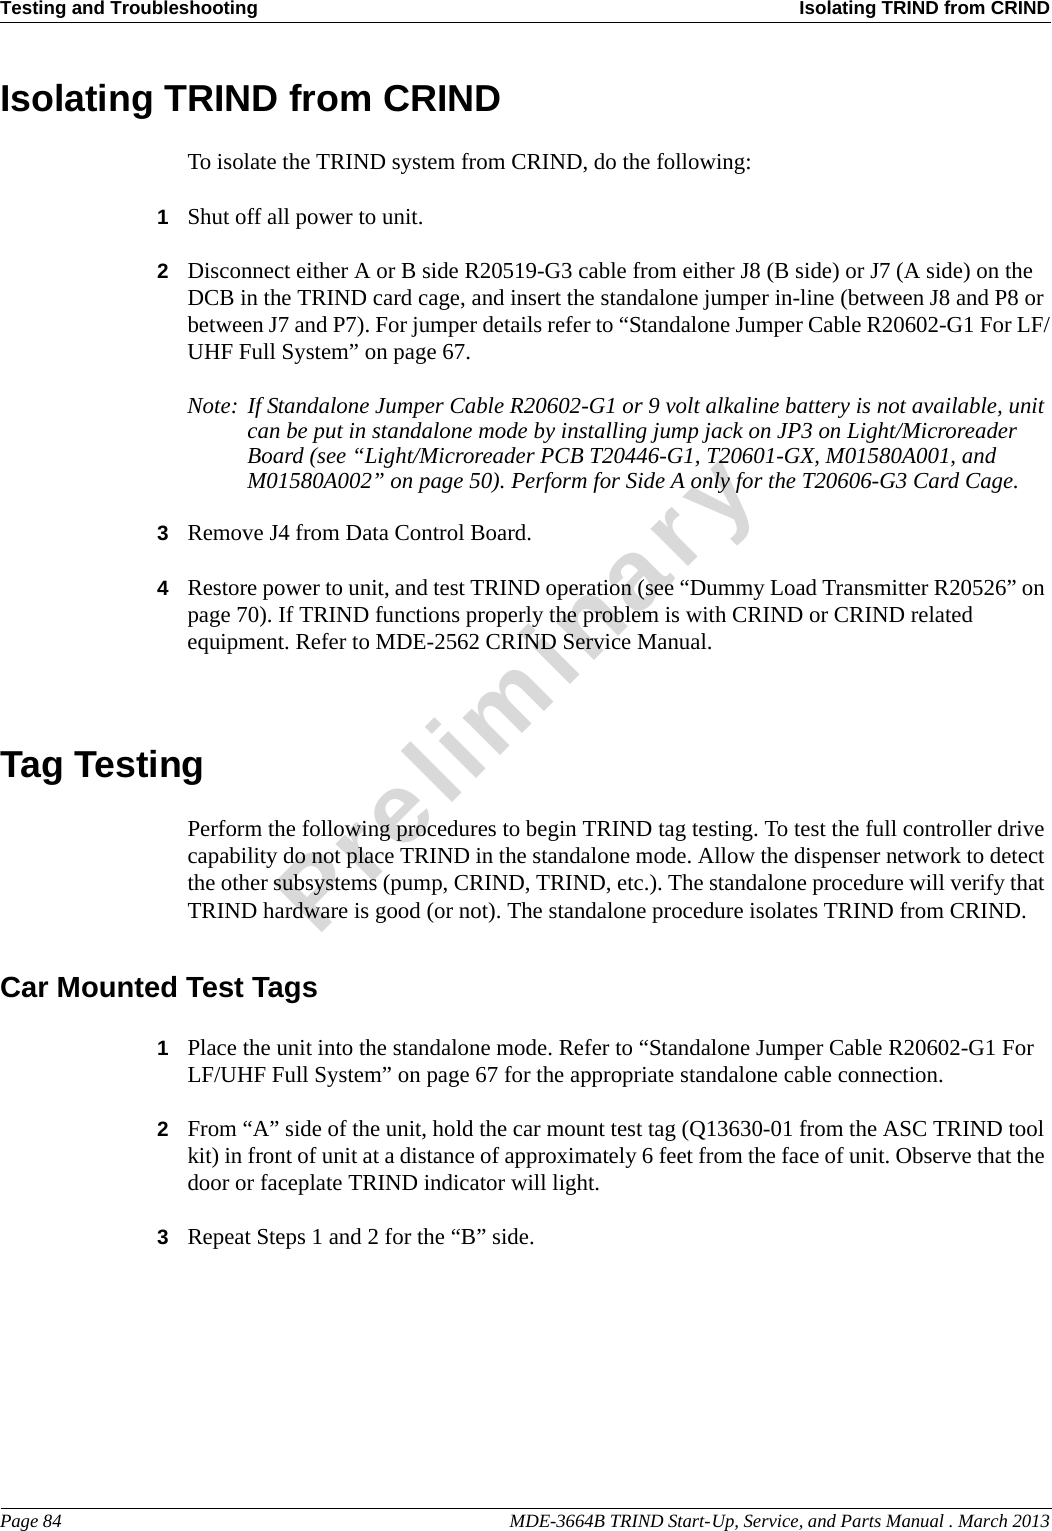 Testing and Troubleshooting Isolating TRIND from CRINDPage 84                                                                                                  MDE-3664B TRIND Start-Up, Service, and Parts Manual . March 2013PreliminaryIsolating TRIND from CRINDTo isolate the TRIND system from CRIND, do the following:1Shut off all power to unit.2Disconnect either A or B side R20519-G3 cable from either J8 (B side) or J7 (A side) on the DCB in the TRIND card cage, and insert the standalone jumper in-line (between J8 and P8 or between J7 and P7). For jumper details refer to “Standalone Jumper Cable R20602-G1 For LF/UHF Full System” on page 67.Note: If Standalone Jumper Cable R20602-G1 or 9 volt alkaline battery is not available, unit can be put in standalone mode by installing jump jack on JP3 on Light/Microreader Board (see “Light/Microreader PCB T20446-G1, T20601-GX, M01580A001, and M01580A002” on page 50). Perform for Side A only for the T20606-G3 Card Cage.3Remove J4 from Data Control Board.4Restore power to unit, and test TRIND operation (see “Dummy Load Transmitter R20526” on page 70). If TRIND functions properly the problem is with CRIND or CRIND related equipment. Refer to MDE-2562 CRIND Service Manual.Tag TestingPerform the following procedures to begin TRIND tag testing. To test the full controller drive capability do not place TRIND in the standalone mode. Allow the dispenser network to detect the other subsystems (pump, CRIND, TRIND, etc.). The standalone procedure will verify that TRIND hardware is good (or not). The standalone procedure isolates TRIND from CRIND.Car Mounted Test Tags1Place the unit into the standalone mode. Refer to “Standalone Jumper Cable R20602-G1 For LF/UHF Full System” on page 67 for the appropriate standalone cable connection.2From “A” side of the unit, hold the car mount test tag (Q13630-01 from the ASC TRIND tool kit) in front of unit at a distance of approximately 6 feet from the face of unit. Observe that the door or faceplate TRIND indicator will light.3Repeat Steps 1 and 2 for the “B” side.